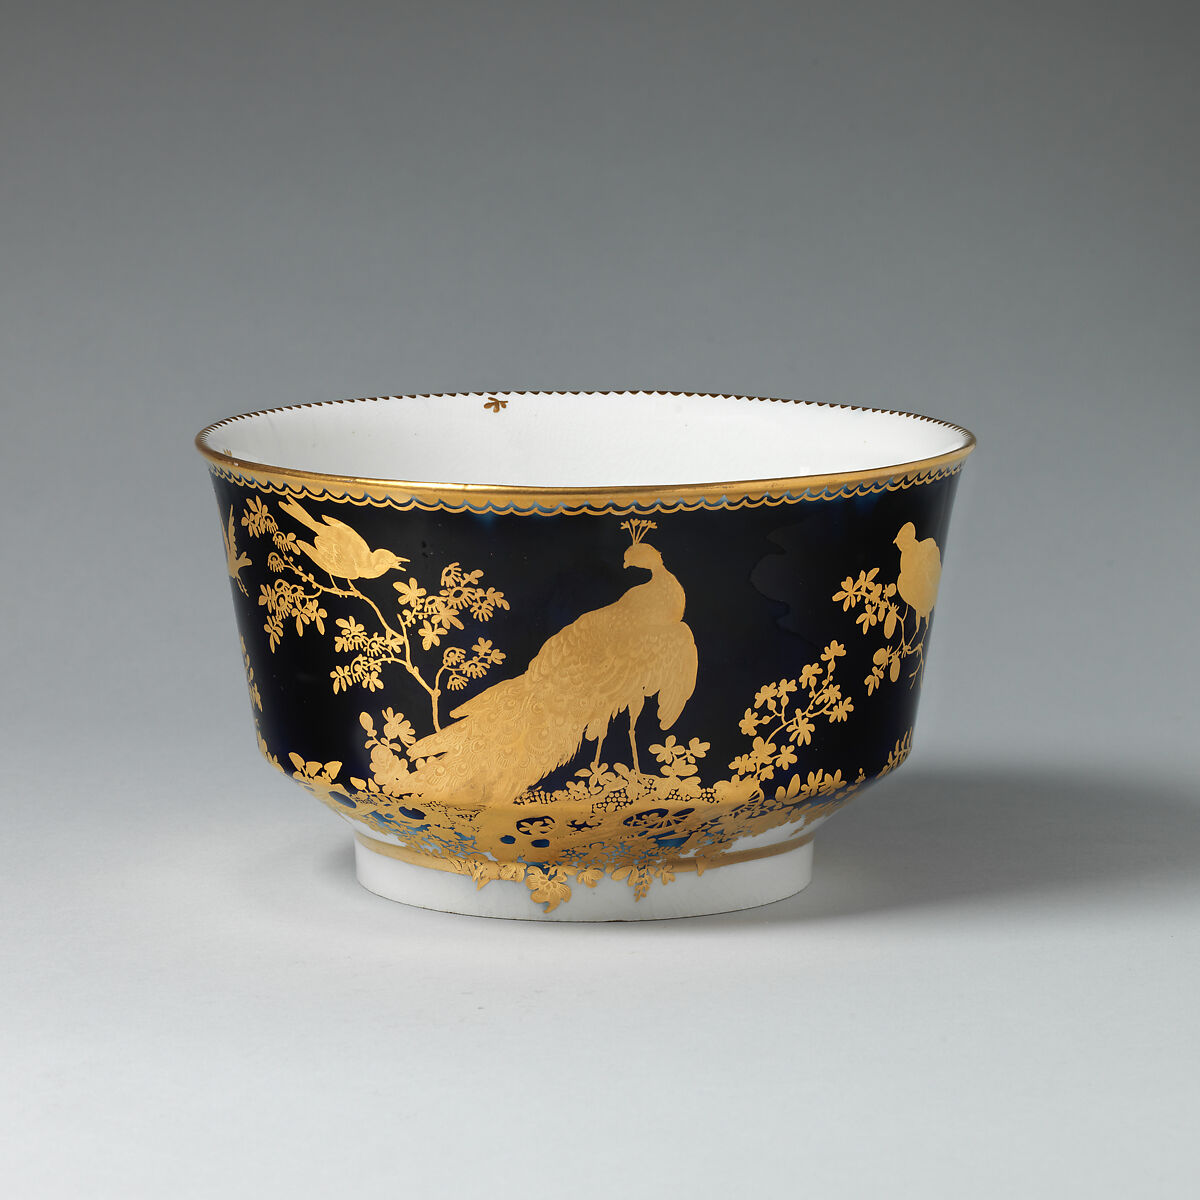 Cake bowl (part of a service), Chelsea Porcelain Manufactory (British, 1745–1784, Gold Anchor Period, 1759–69), Soft-paste porcelain, British, Chelsea 